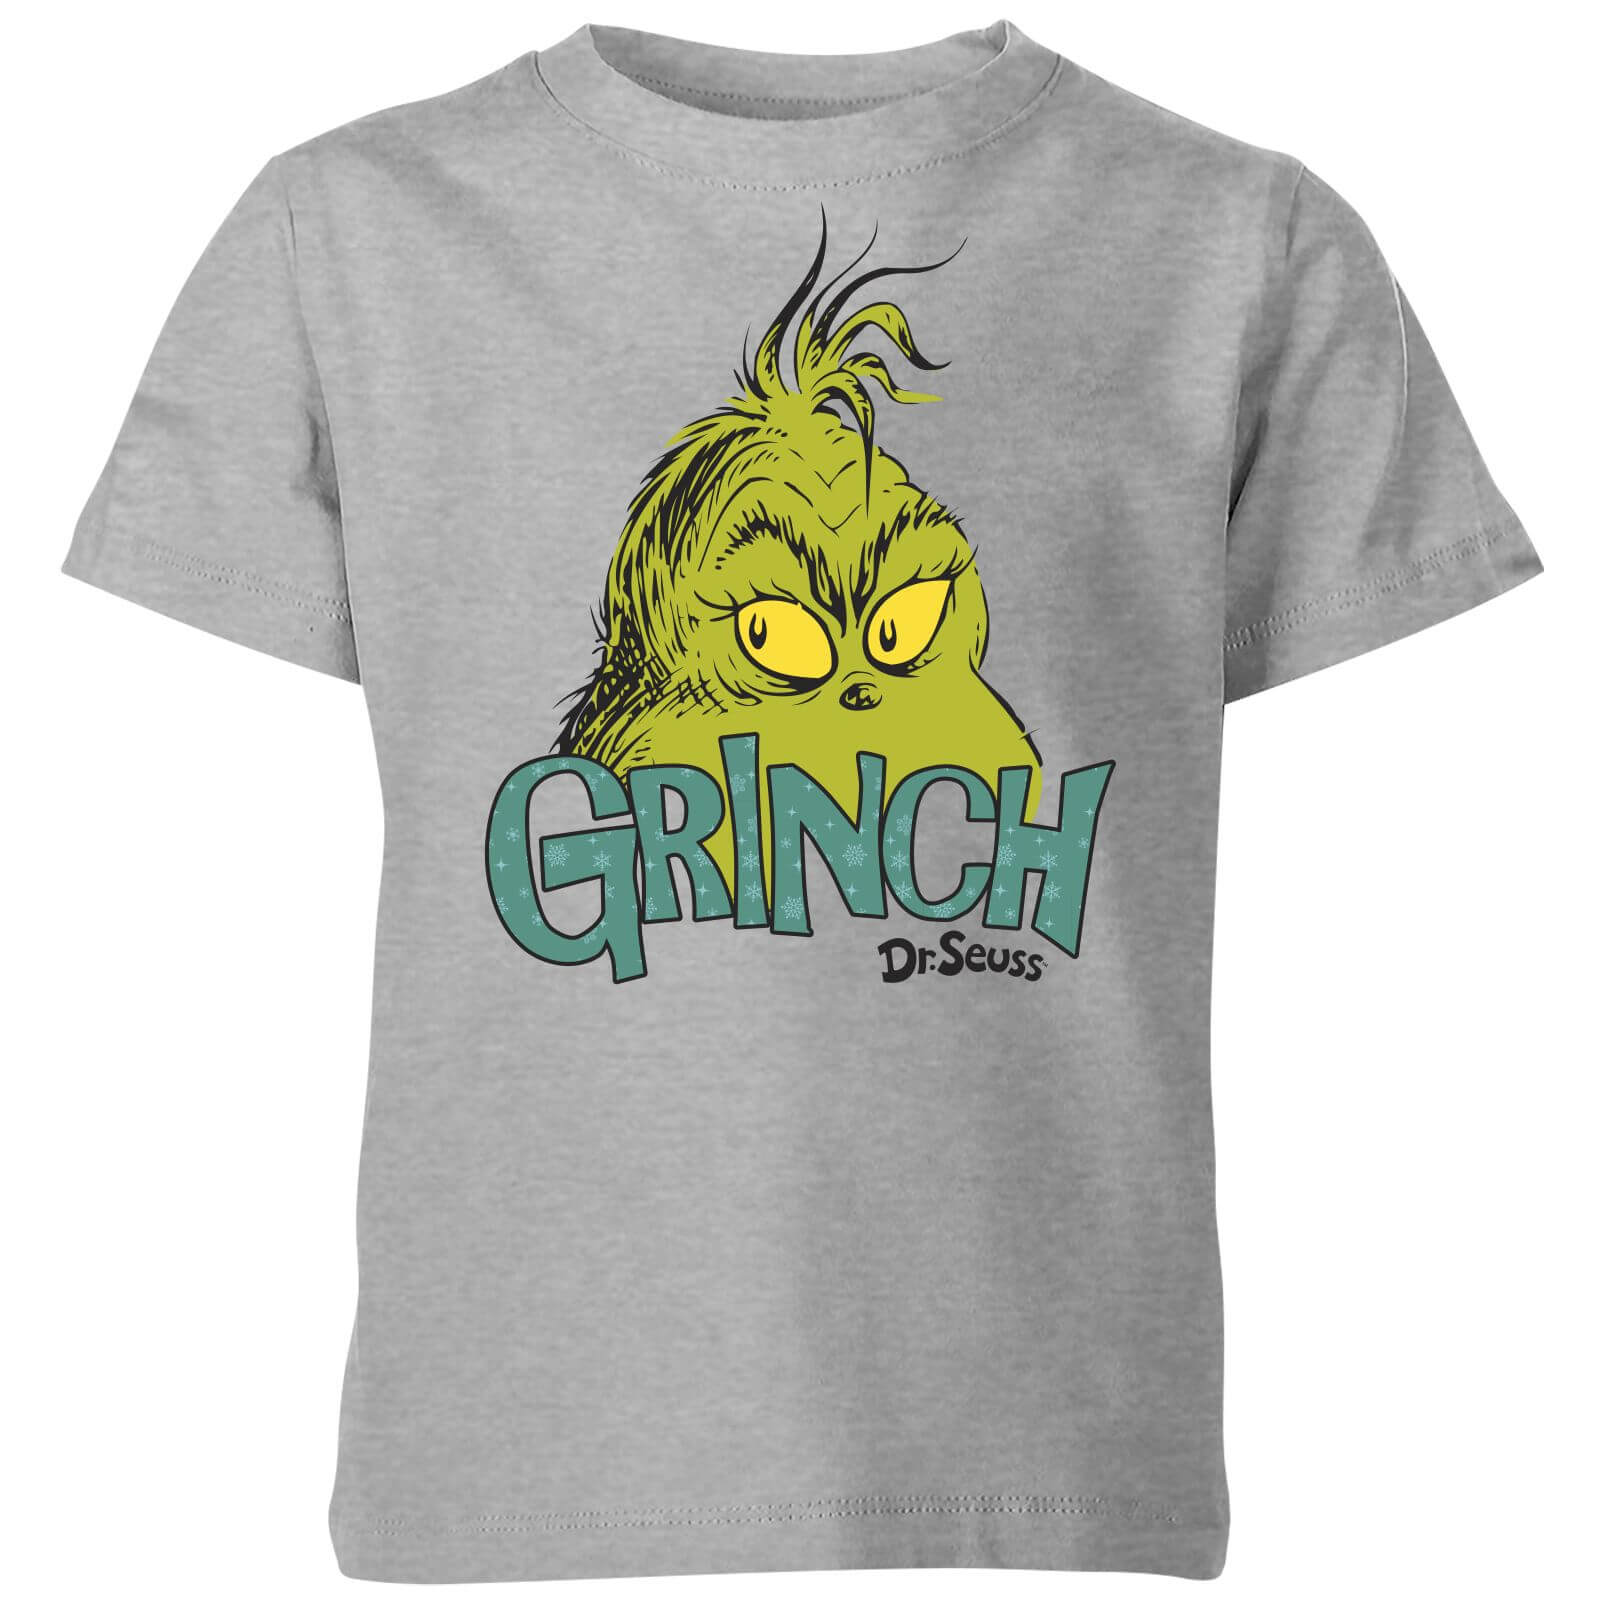 The Grinch Face Kids Christmas T-Shirt - Grey - 7-8 Years